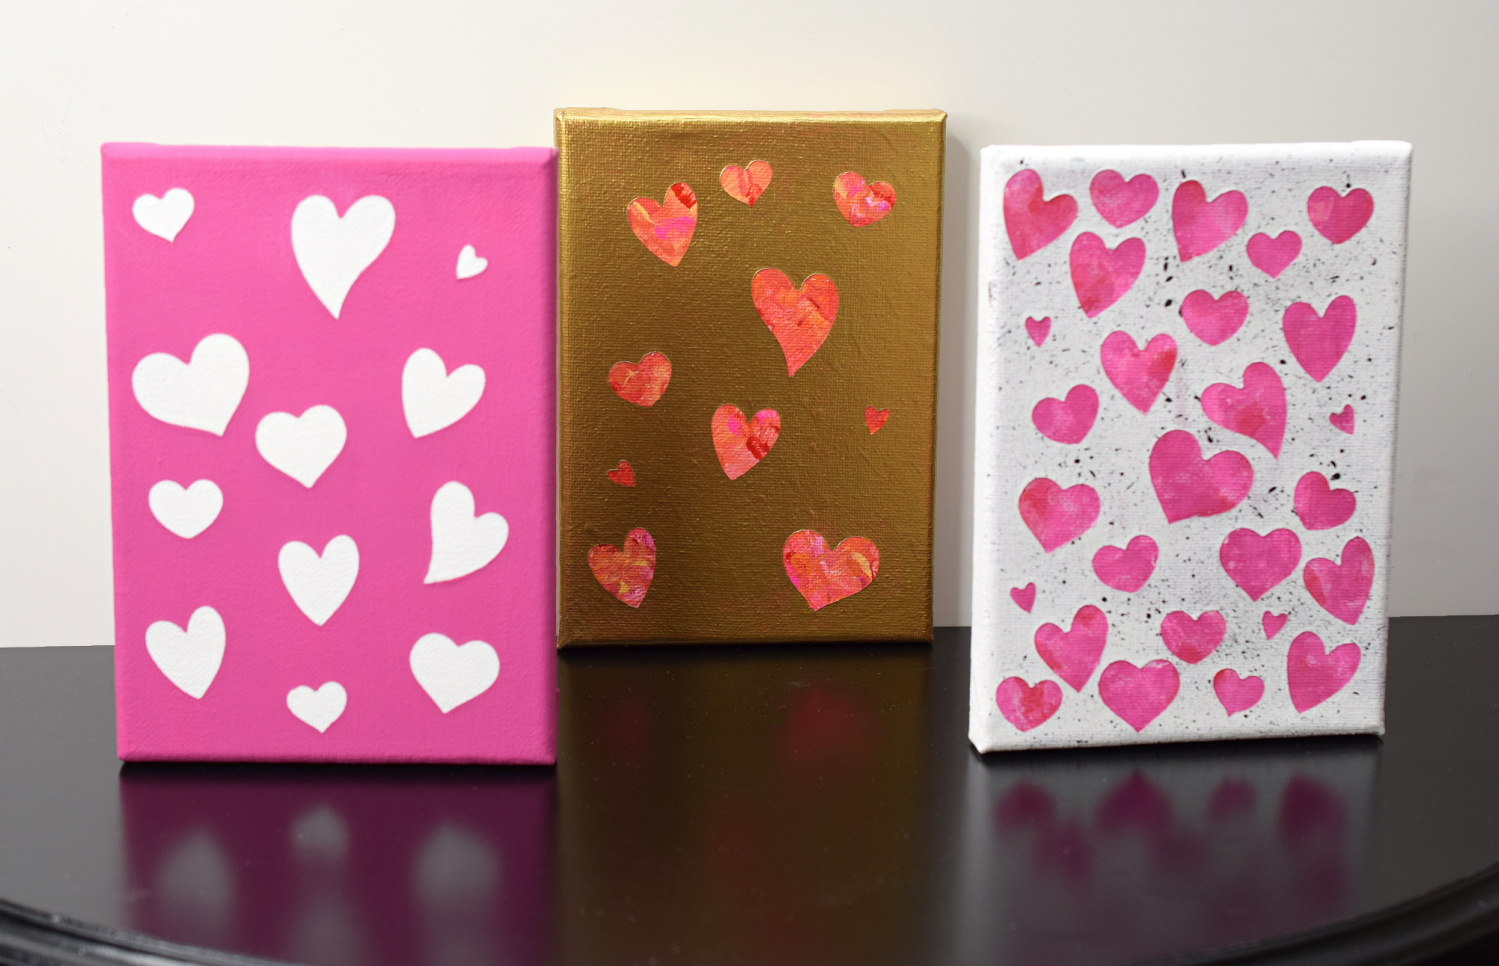 Three canvases with Valentine's Day artwork, each canvas has hearts.